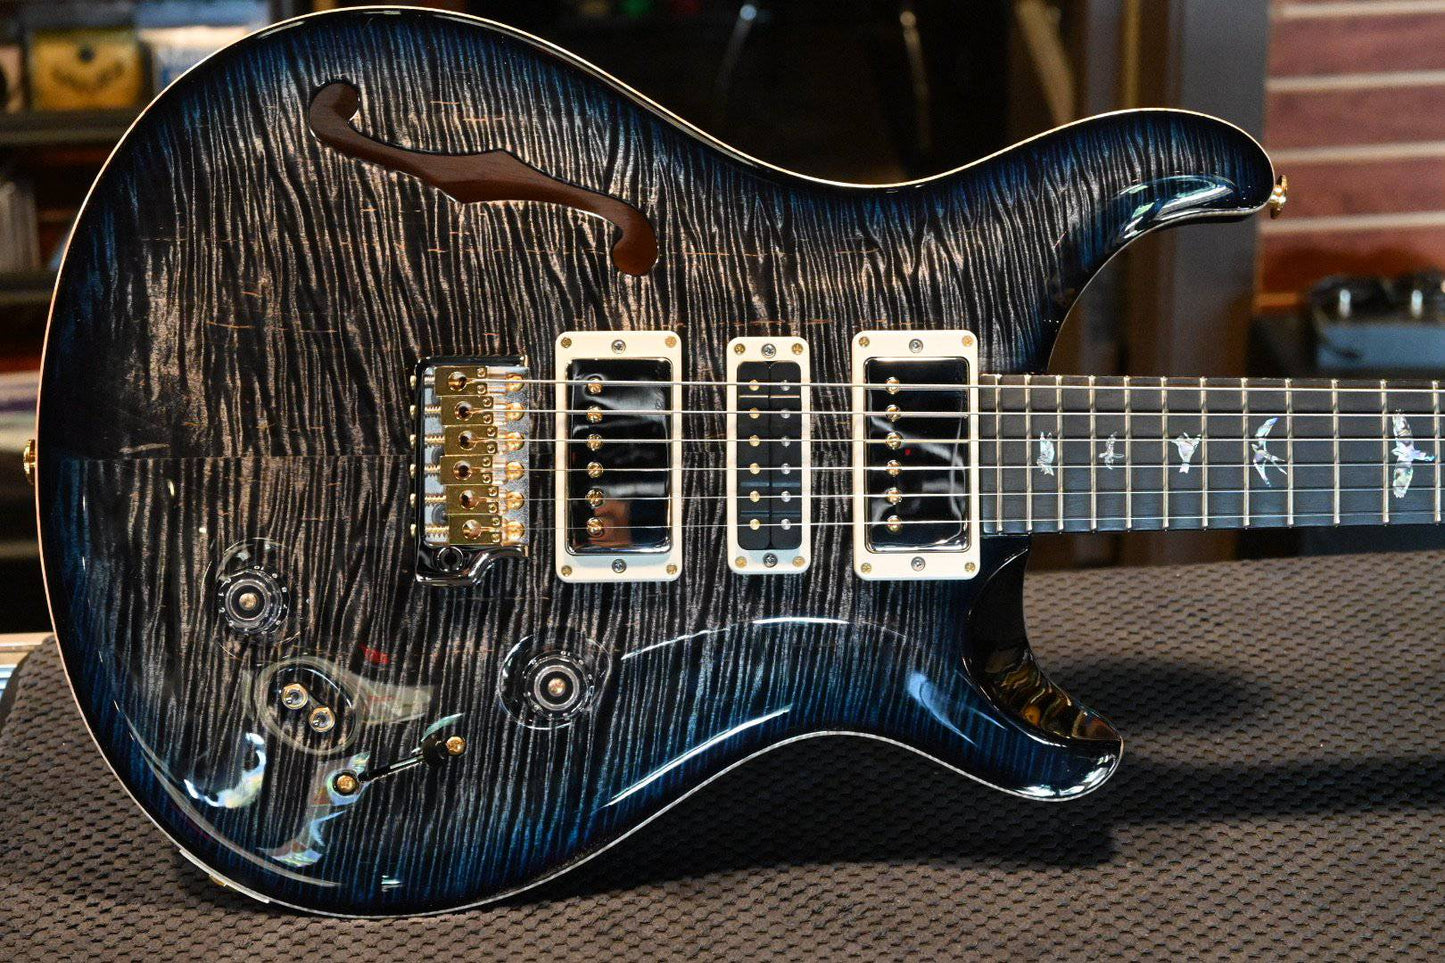 PRS Paul Reed Smith Special 22 Semi-Hollow LTD Artist Package - Charcoal Blue Burst #5220 - Danville Music